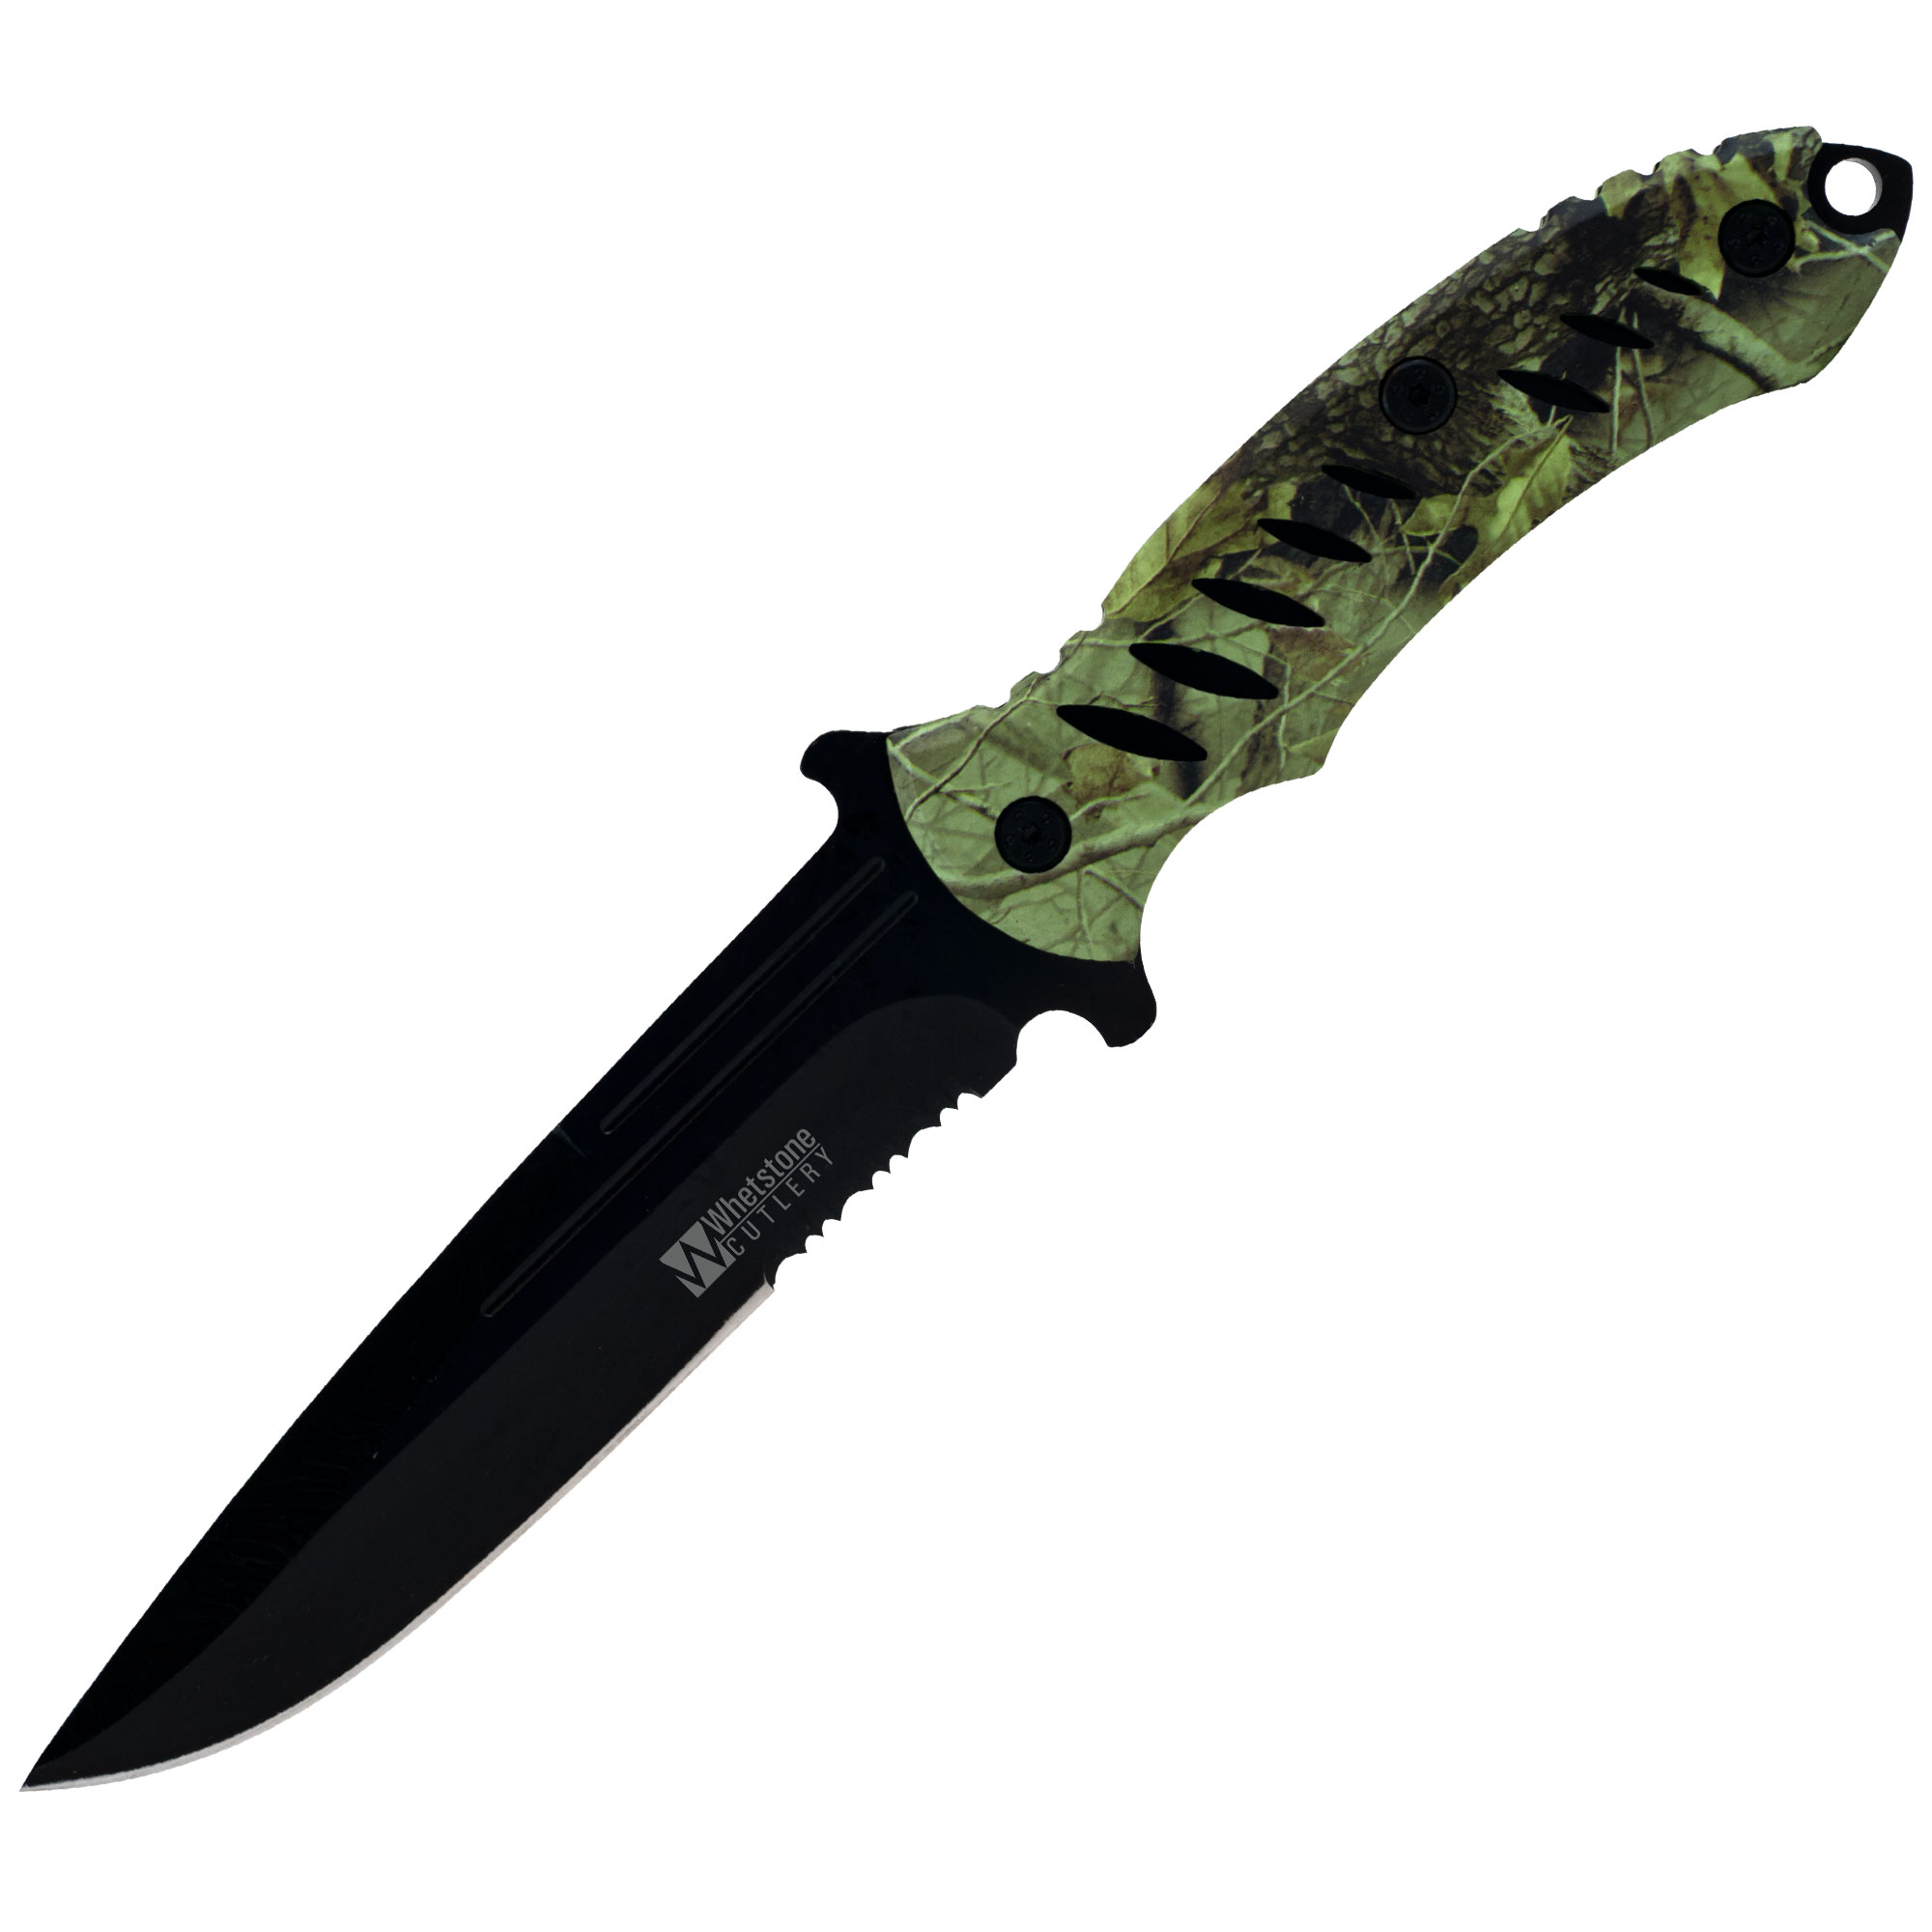 M-Tech Full Tang Camo Survival Utility Knife 10.375 inches